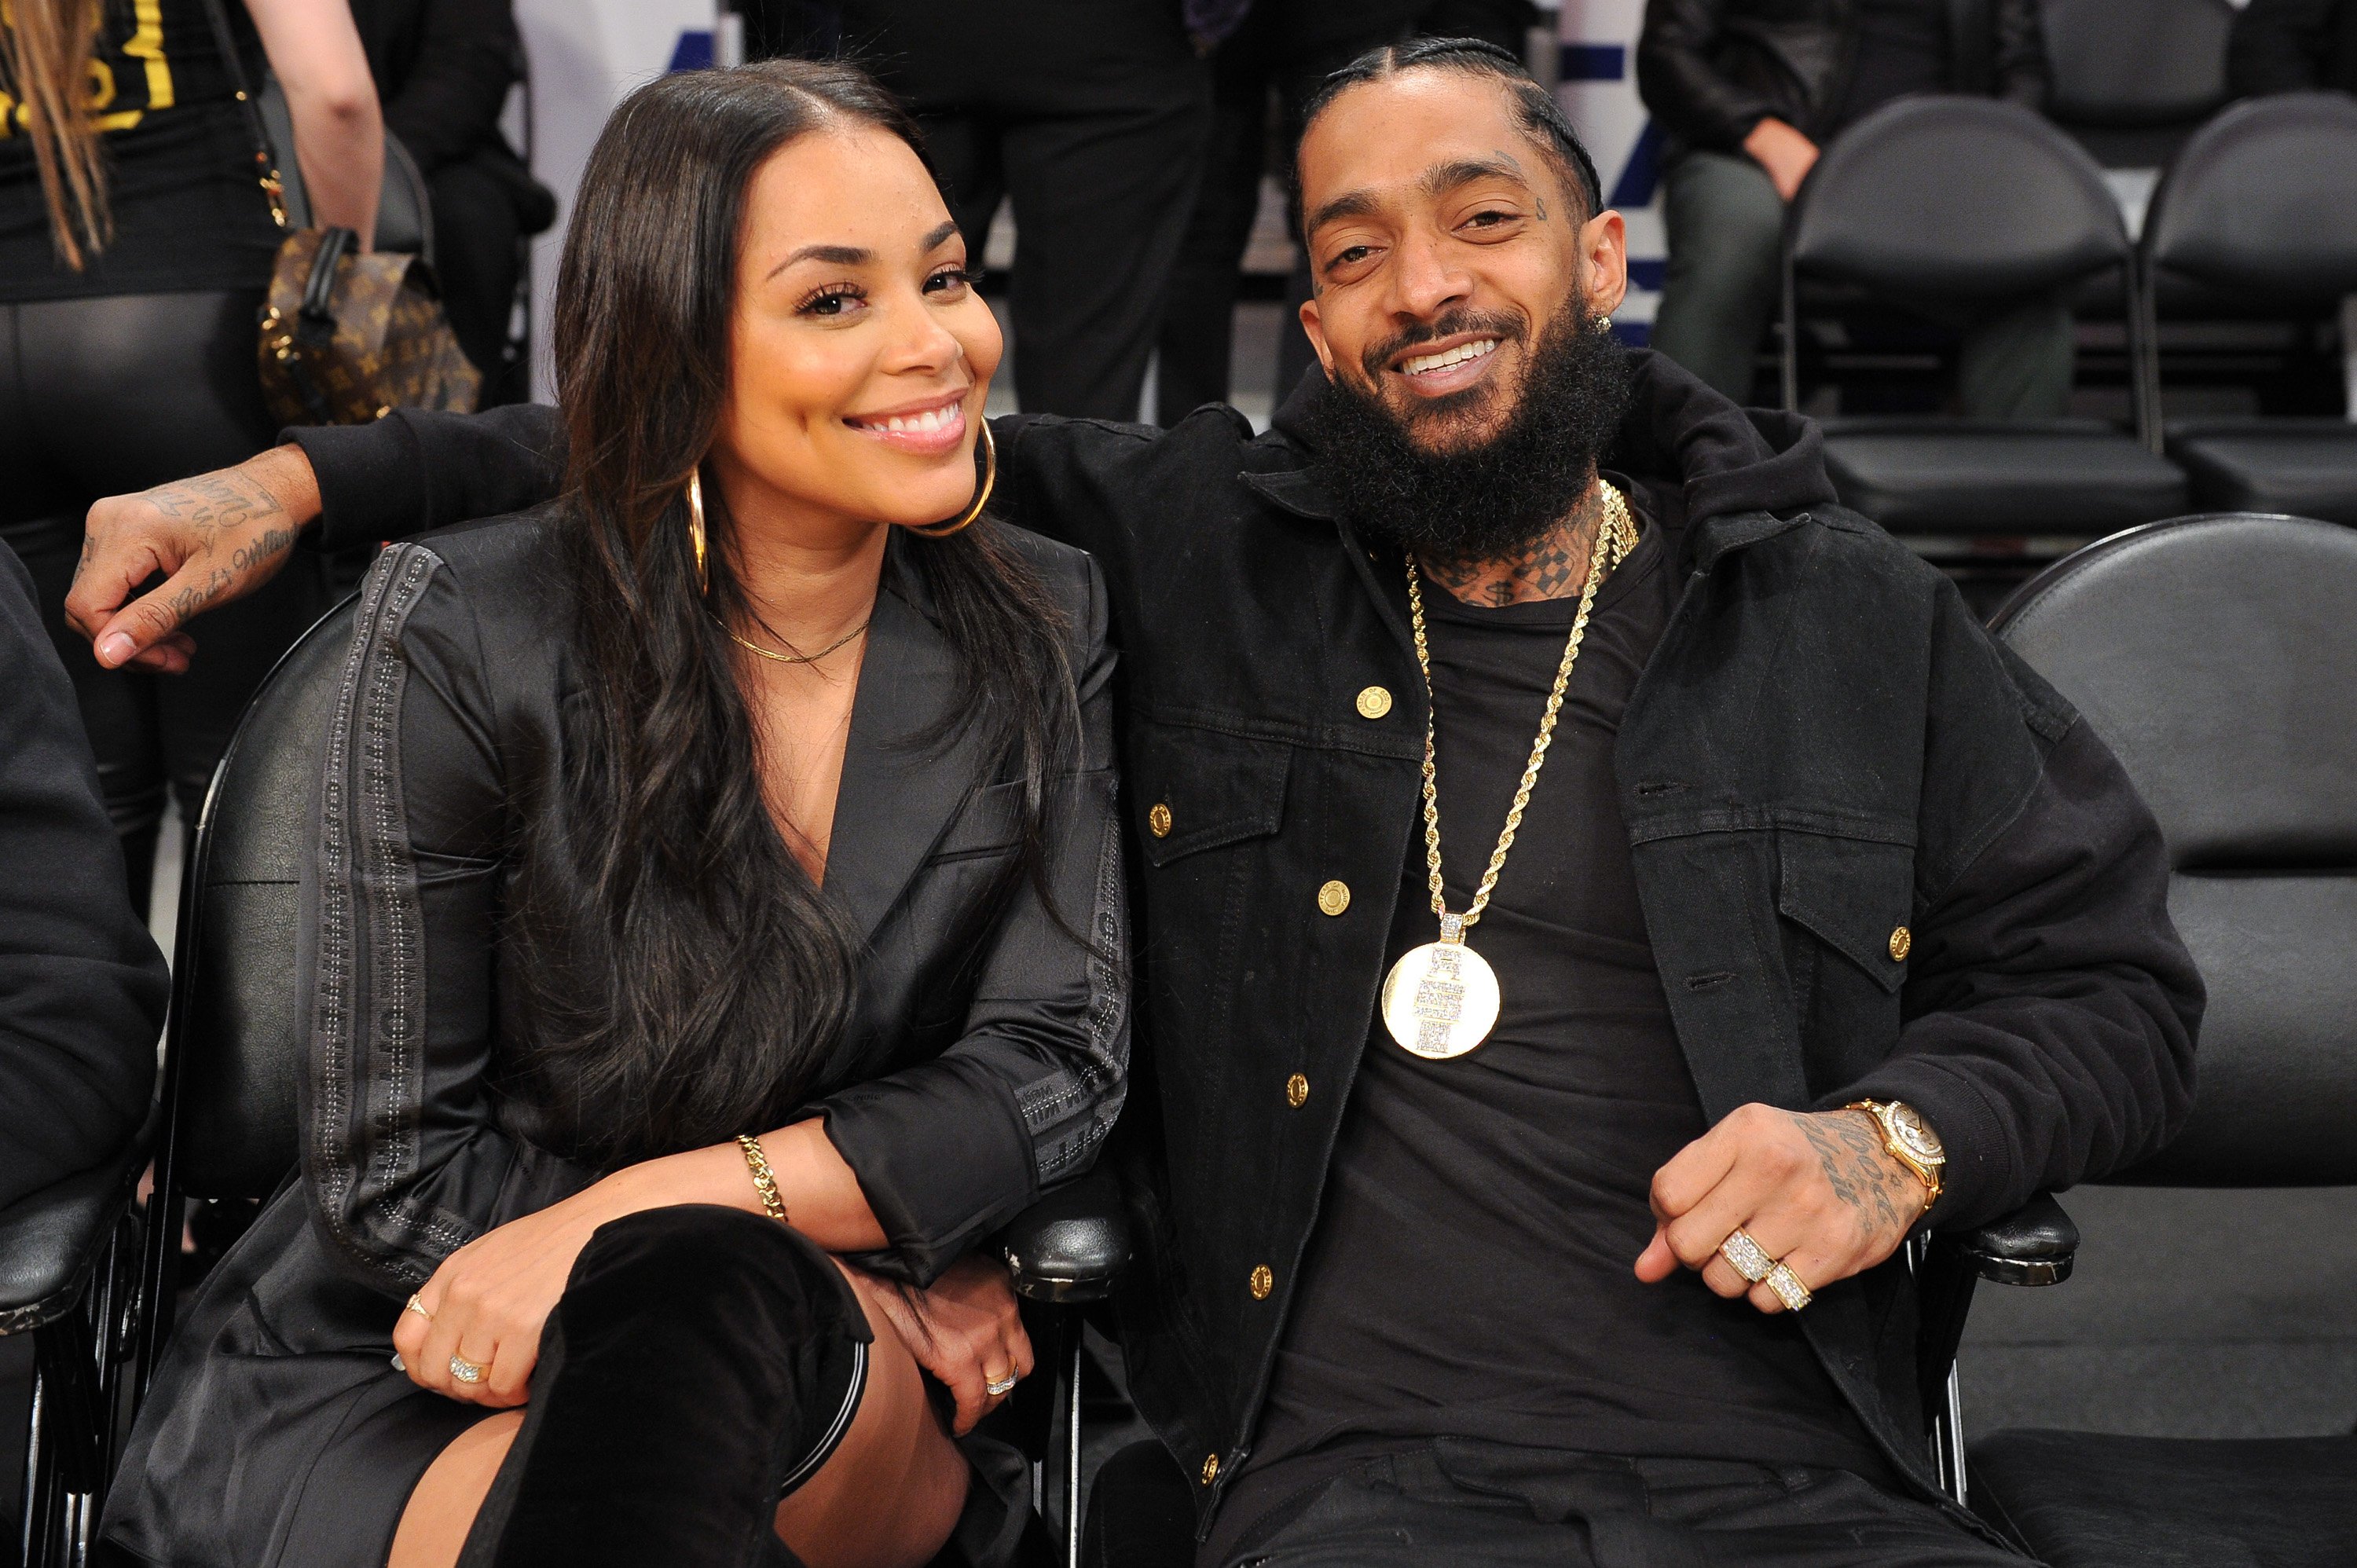 Nipsey Hussle and Lauren London attend a basketball game at Staples Center on November 14, 2018 in Los Angeles, California | Photo: Getty Images